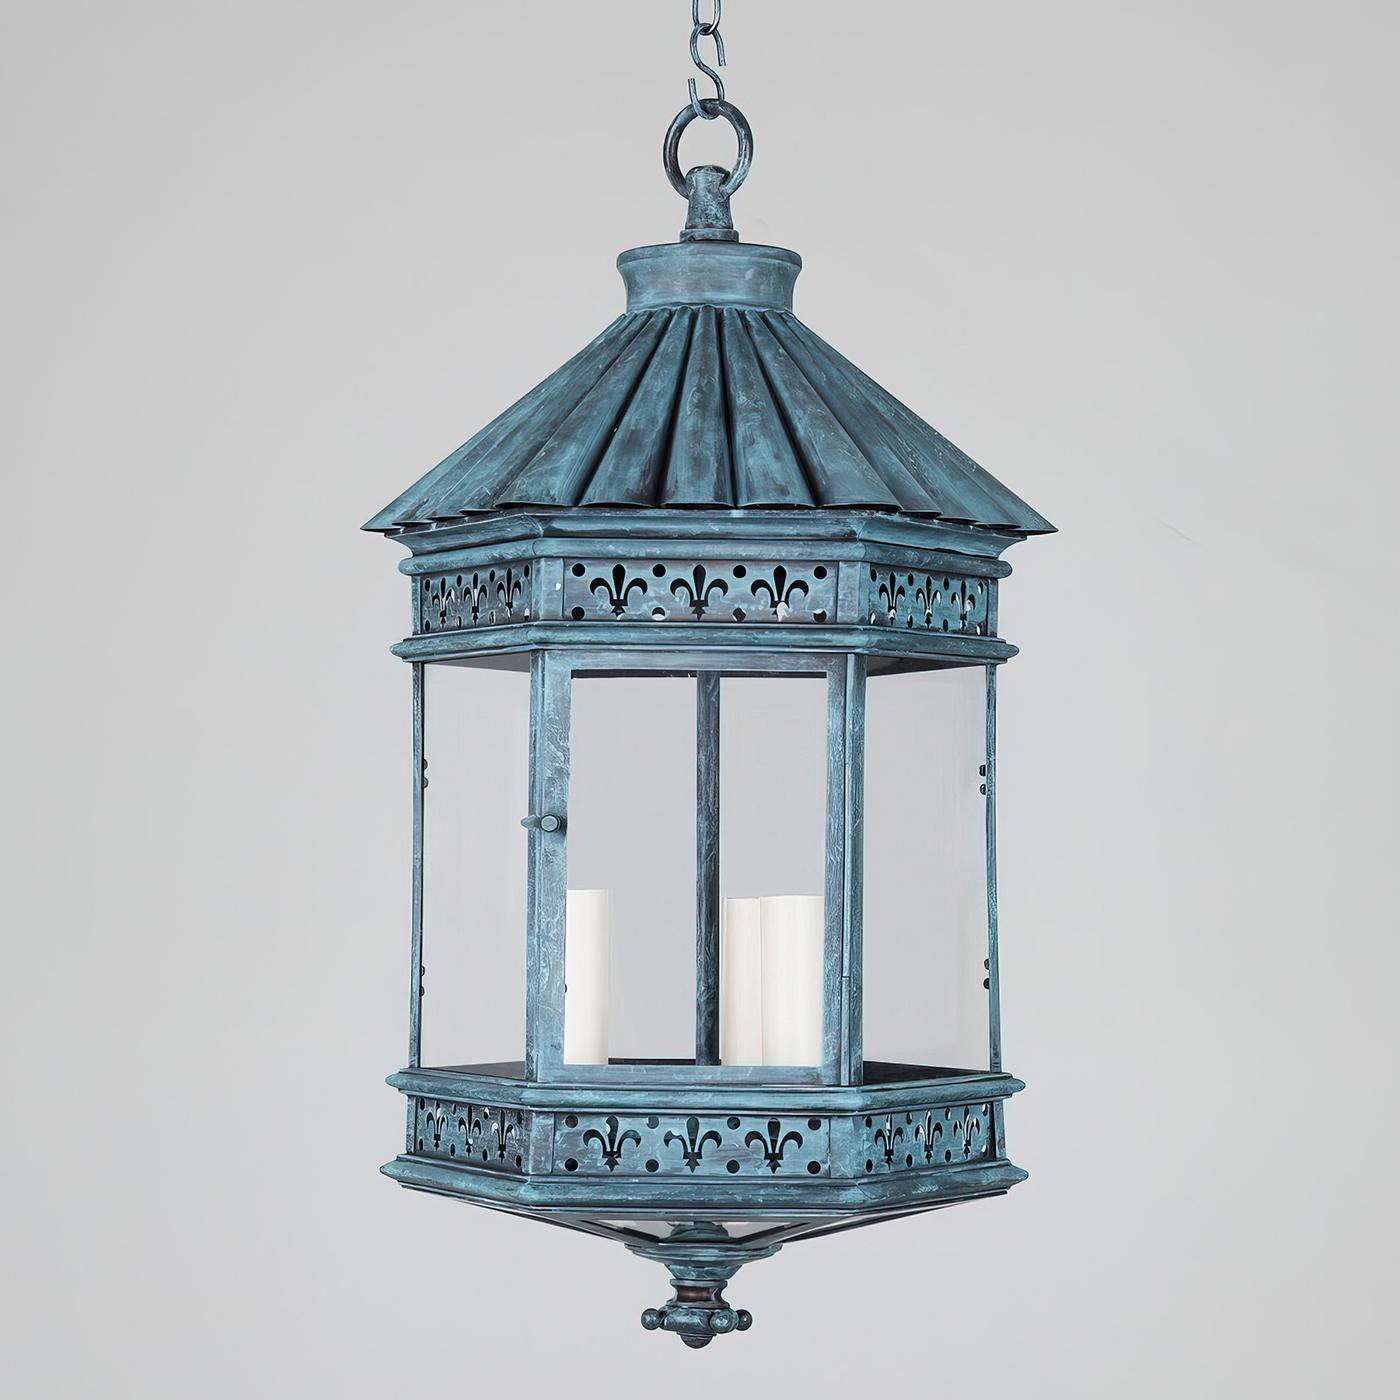 French Provincial French Country Lantern - Verdigris Finish For Sale